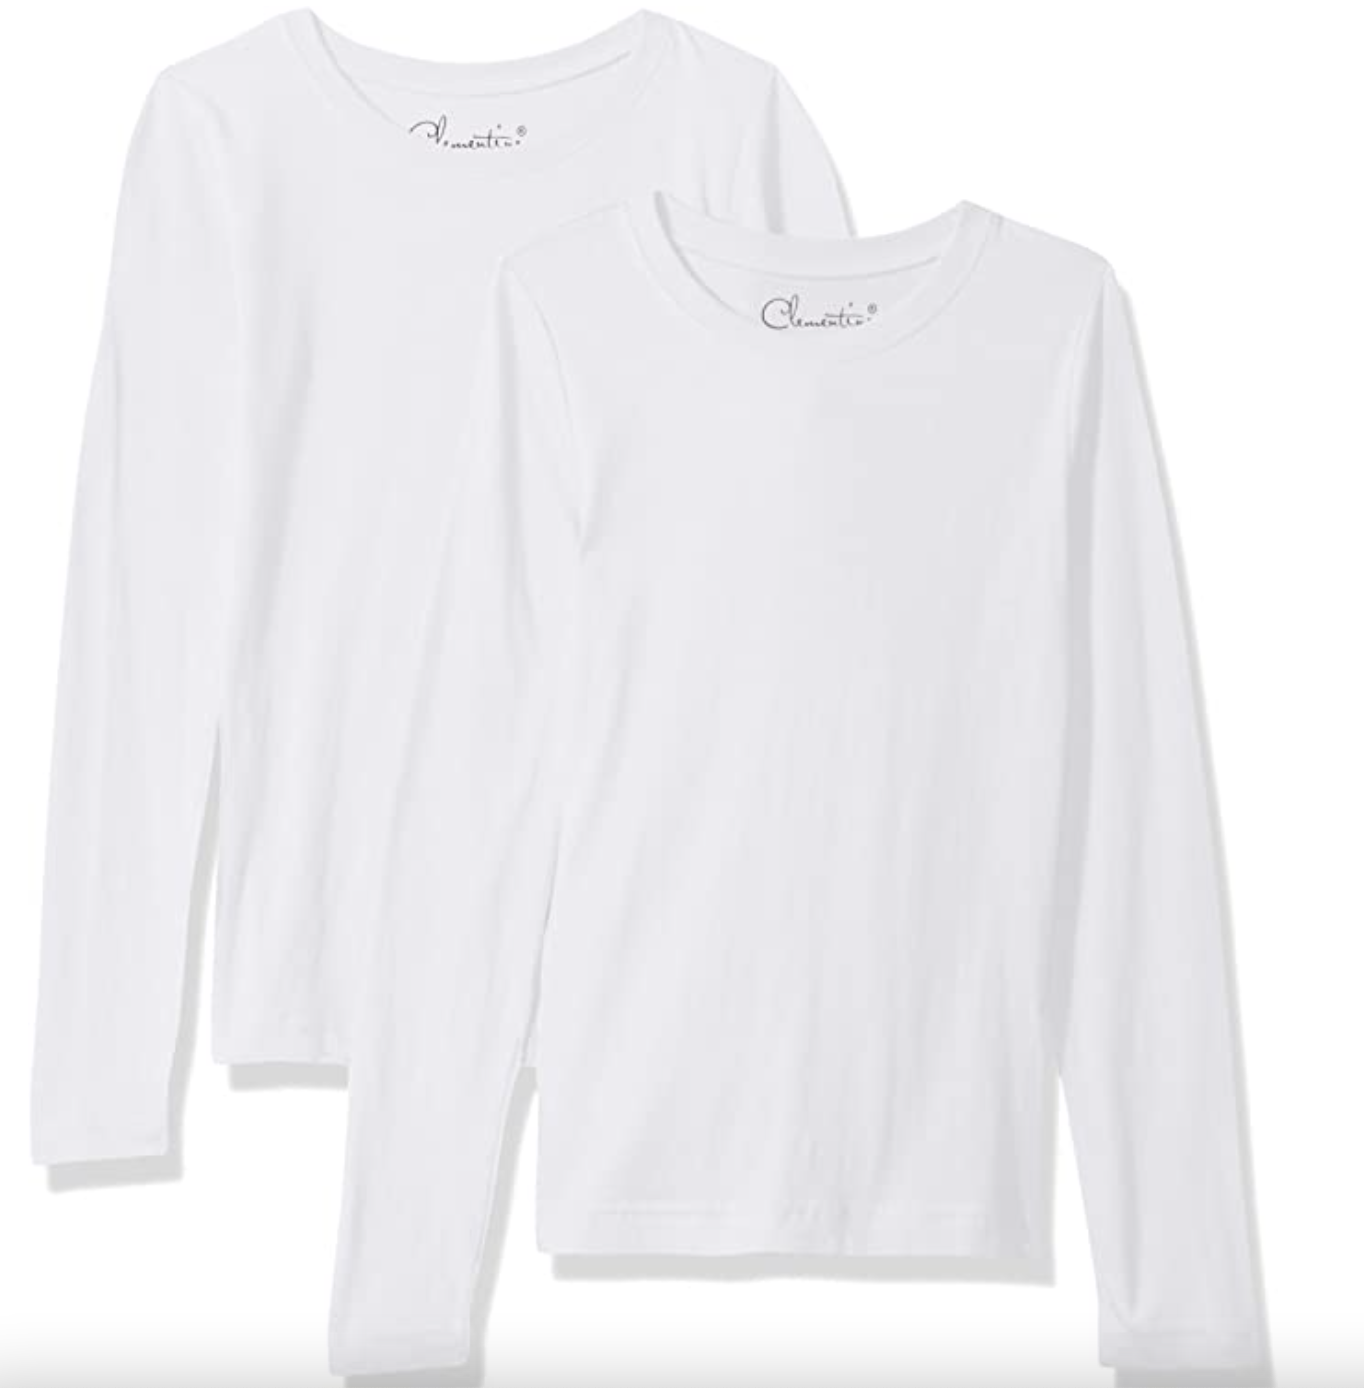 Clementine Girls' Big Everyday T-Shirts Long Sleeve Crew 2-Pack, White/White, S